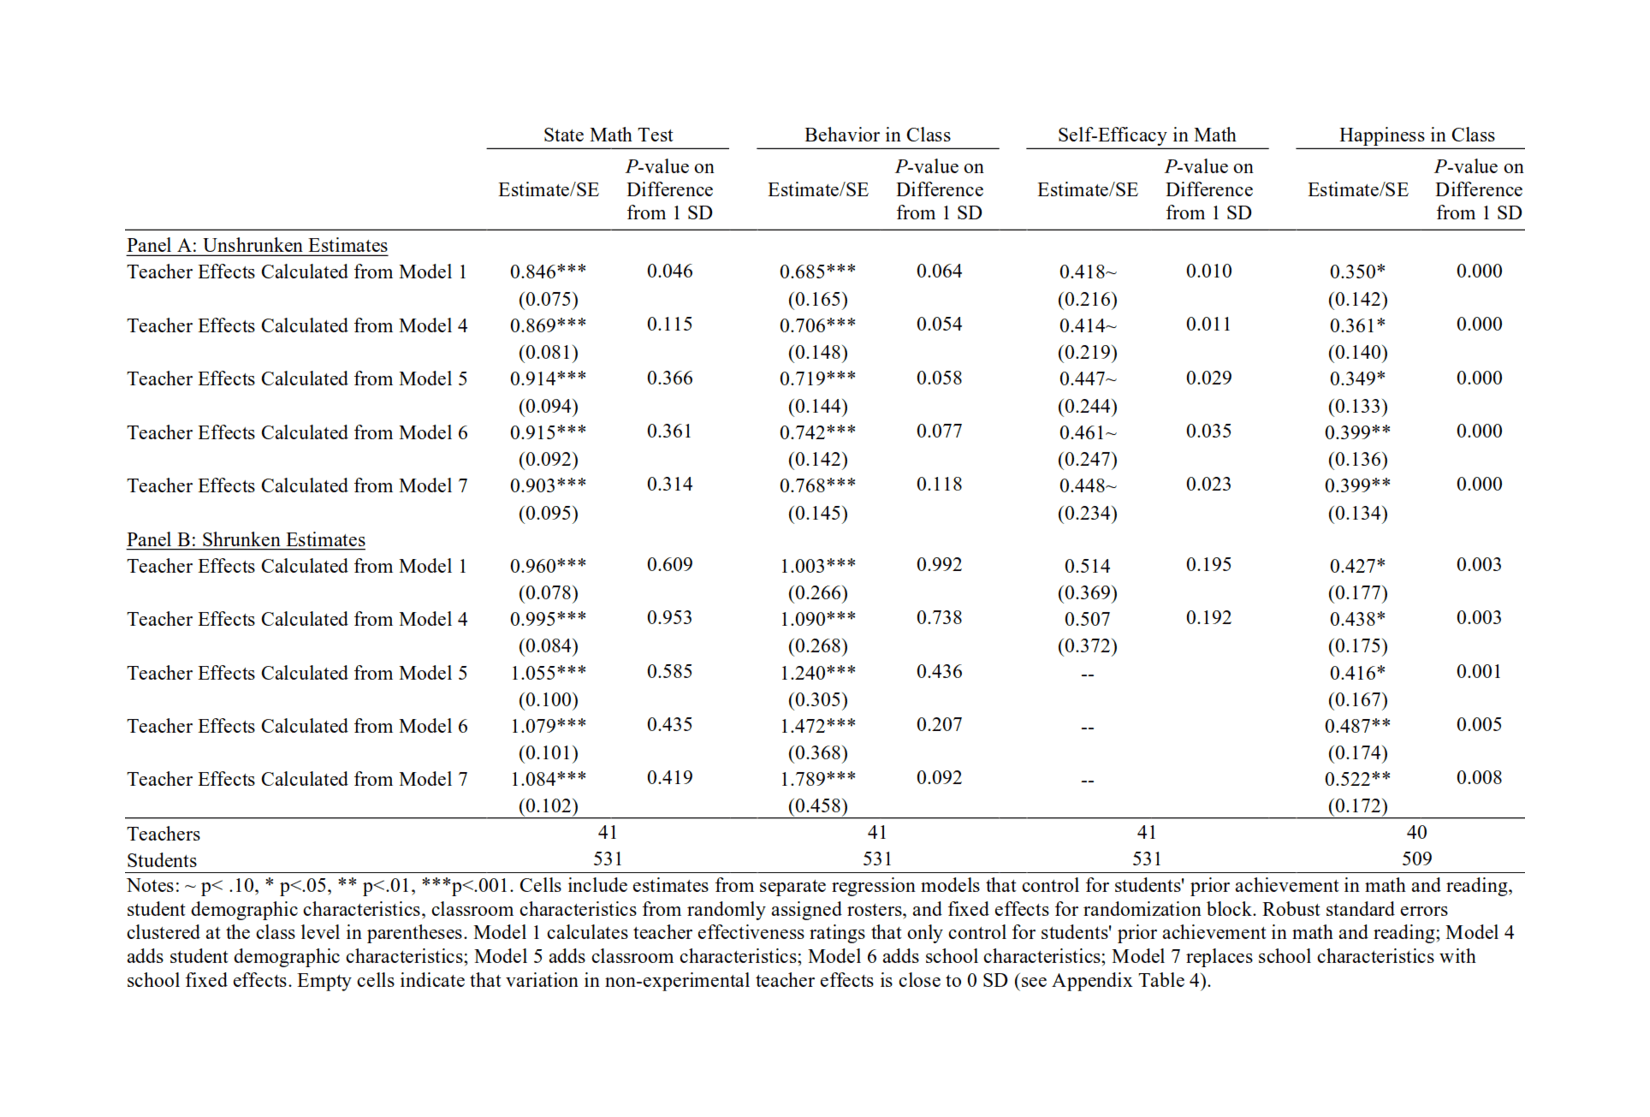 “Table 5: Relationship between Current Student Outcomes and Prior, Non-experimental Teacher Effect Outcomes” [3⁄4 effects <1 imply bias]